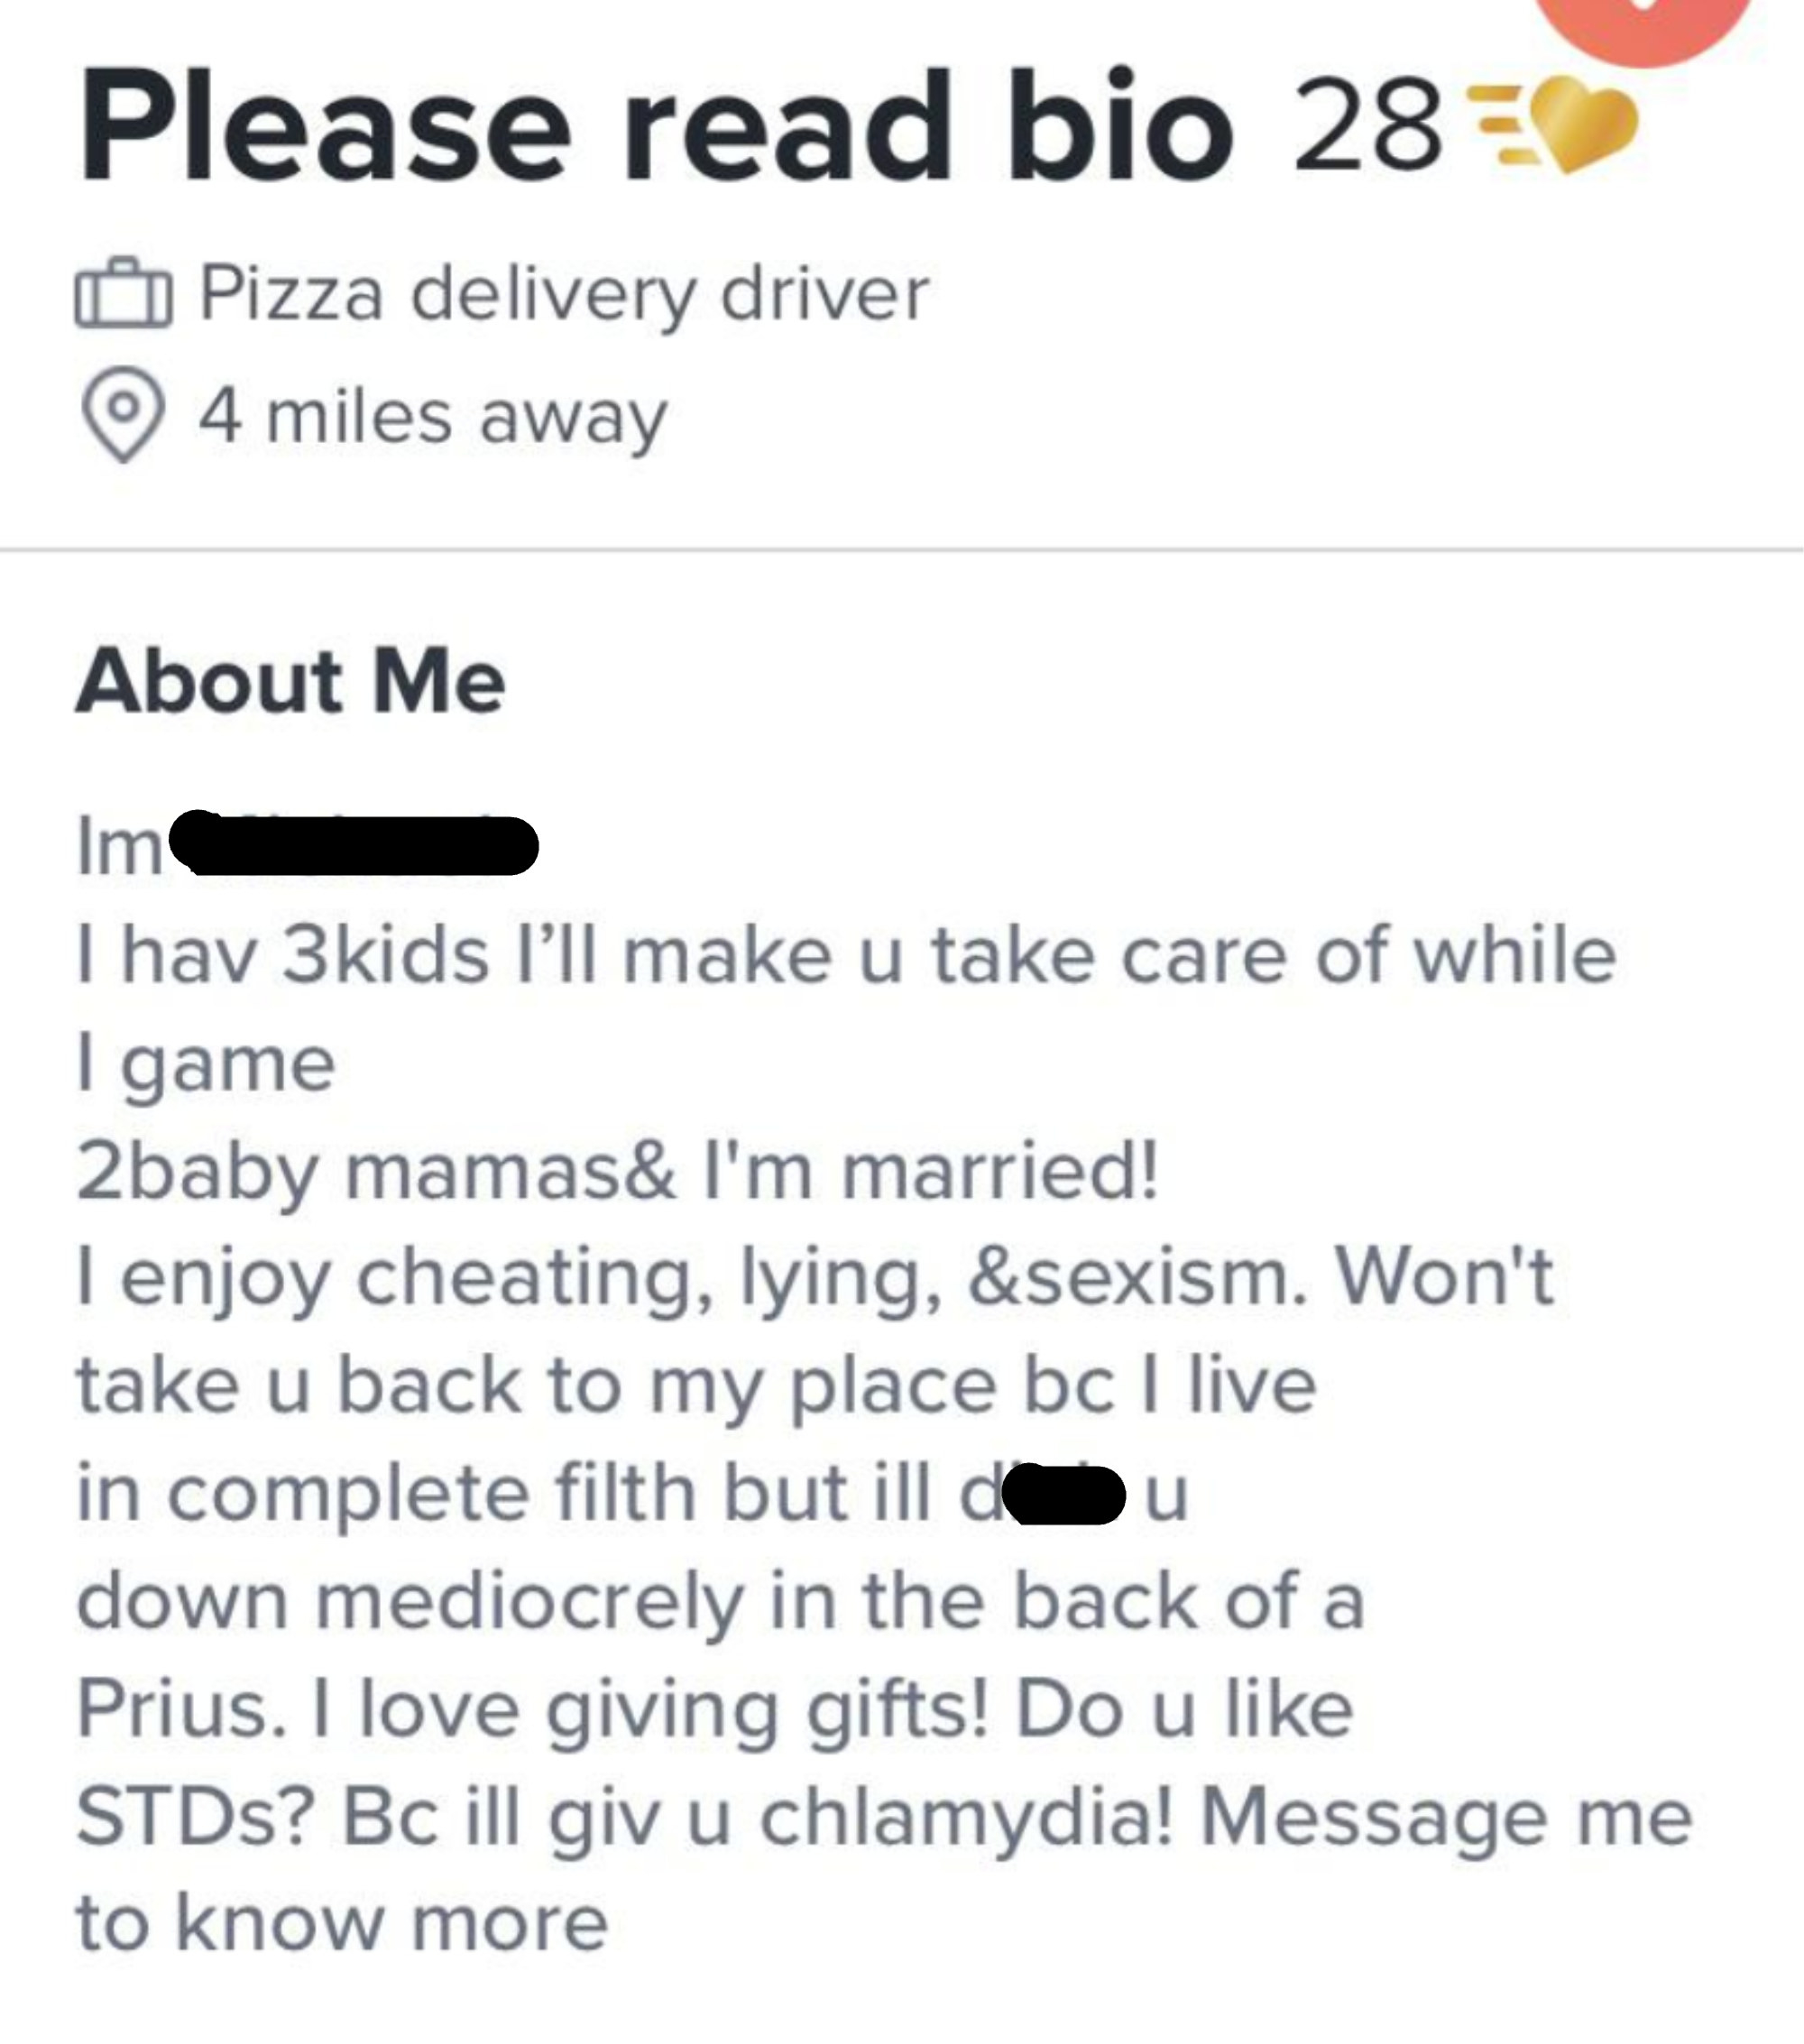 bio reads, i enjoy cheating lying and sexism